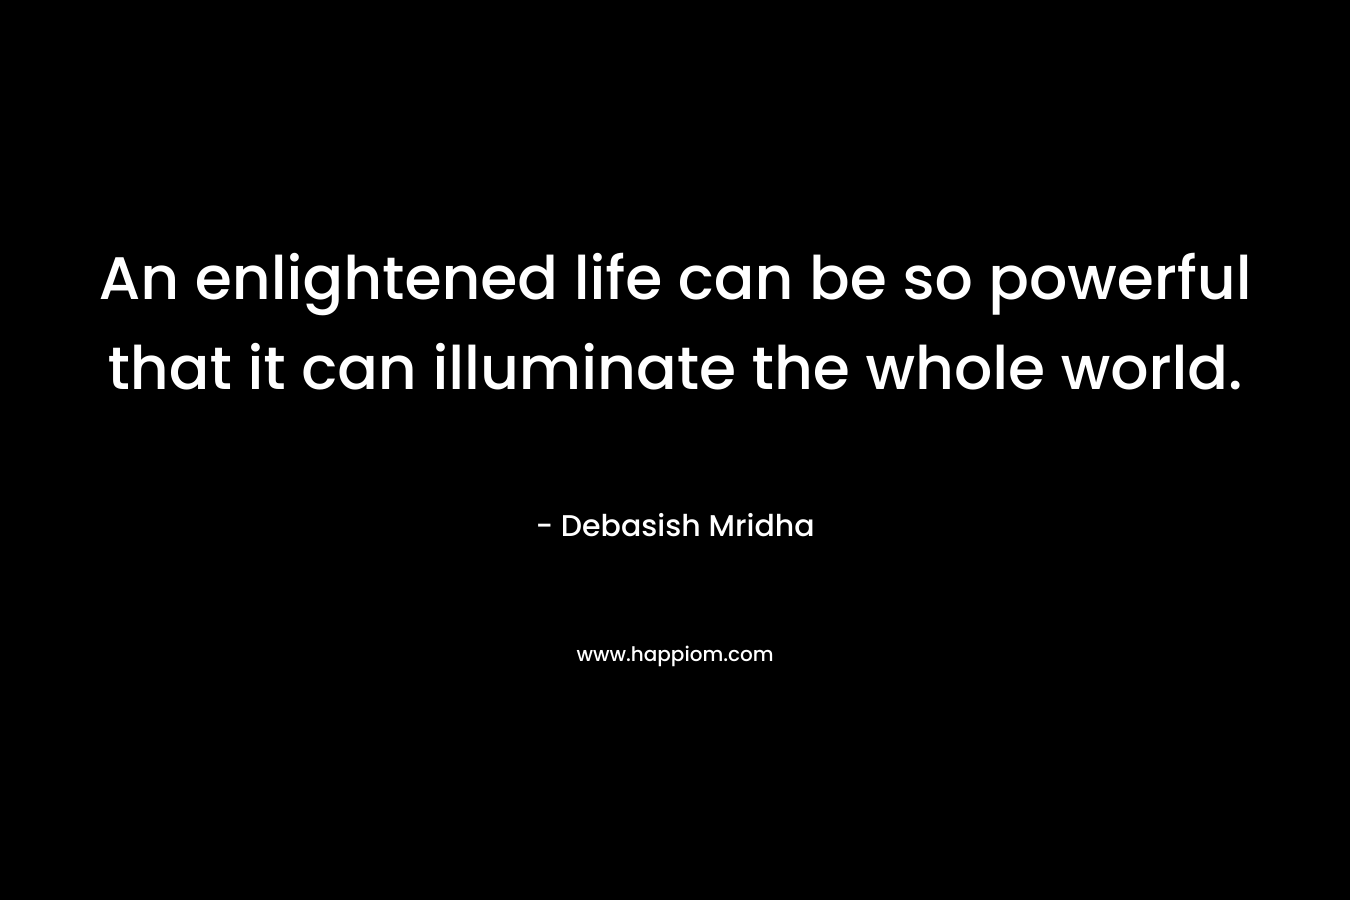 An enlightened life can be so powerful that it can illuminate the whole world.